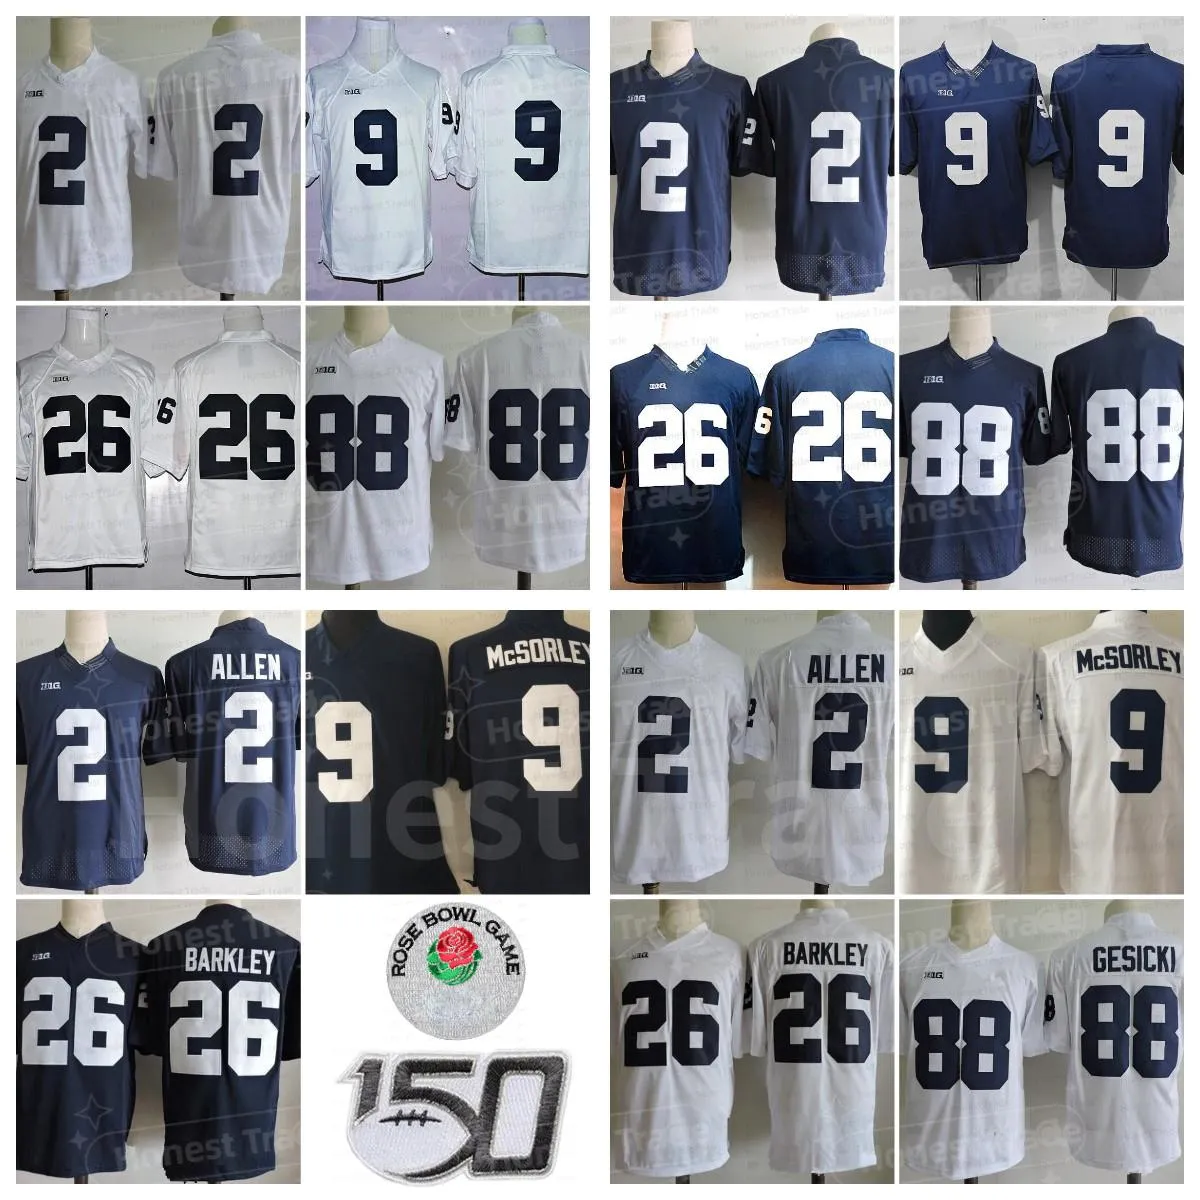 NCAA Penn State College Football #26 Saquon 9 Trace McSorley 88 Mike Gesicki 2 Marcus Allen Paterno Stitched Jerseys White Navy 150th Men Uniforms